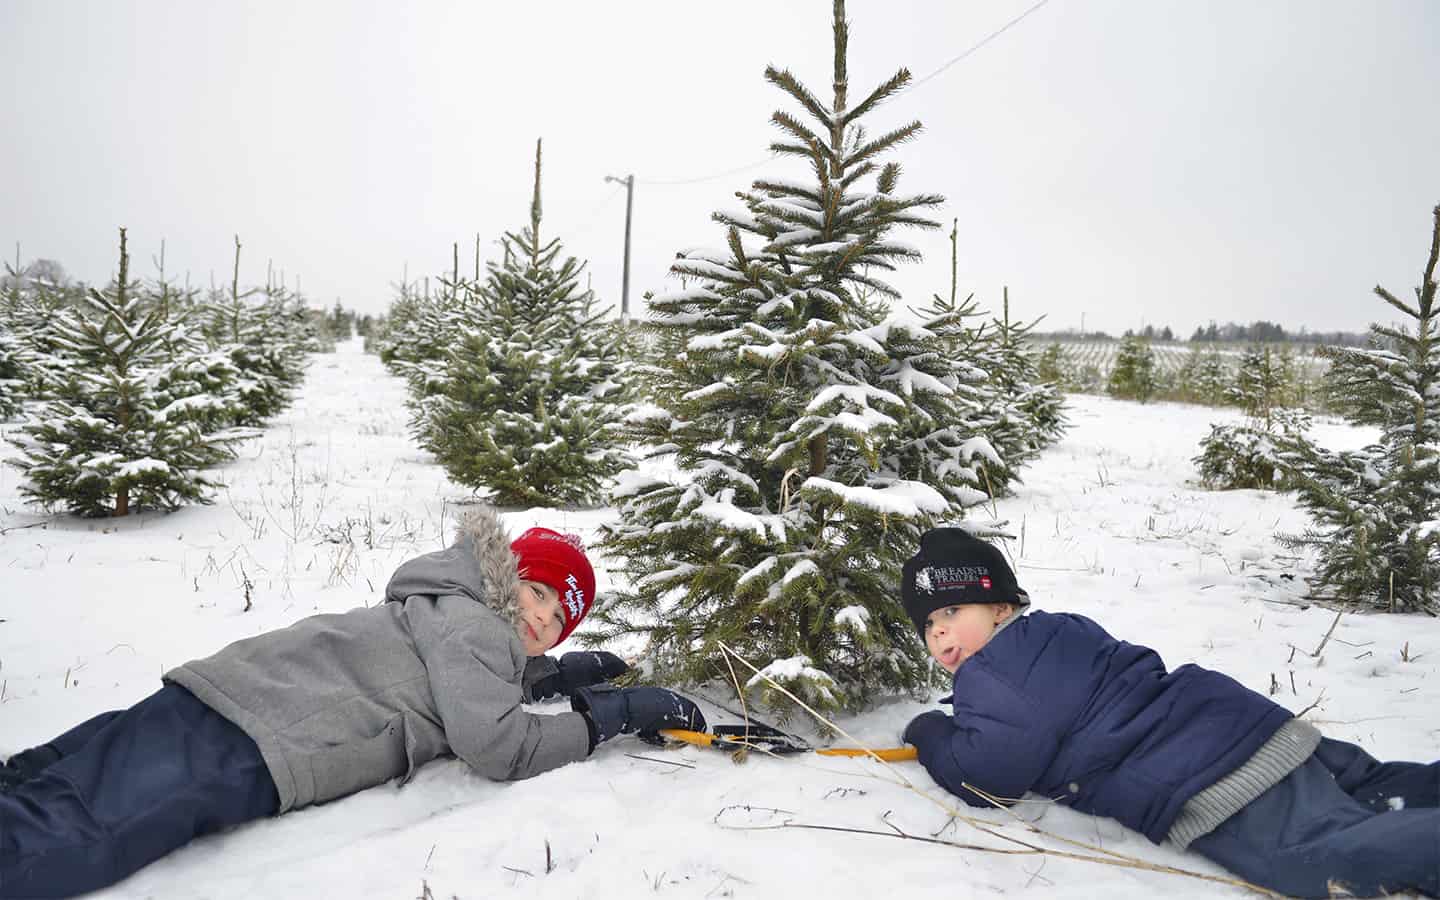 Strong demand for traditional real Christmas trees can exceed supply